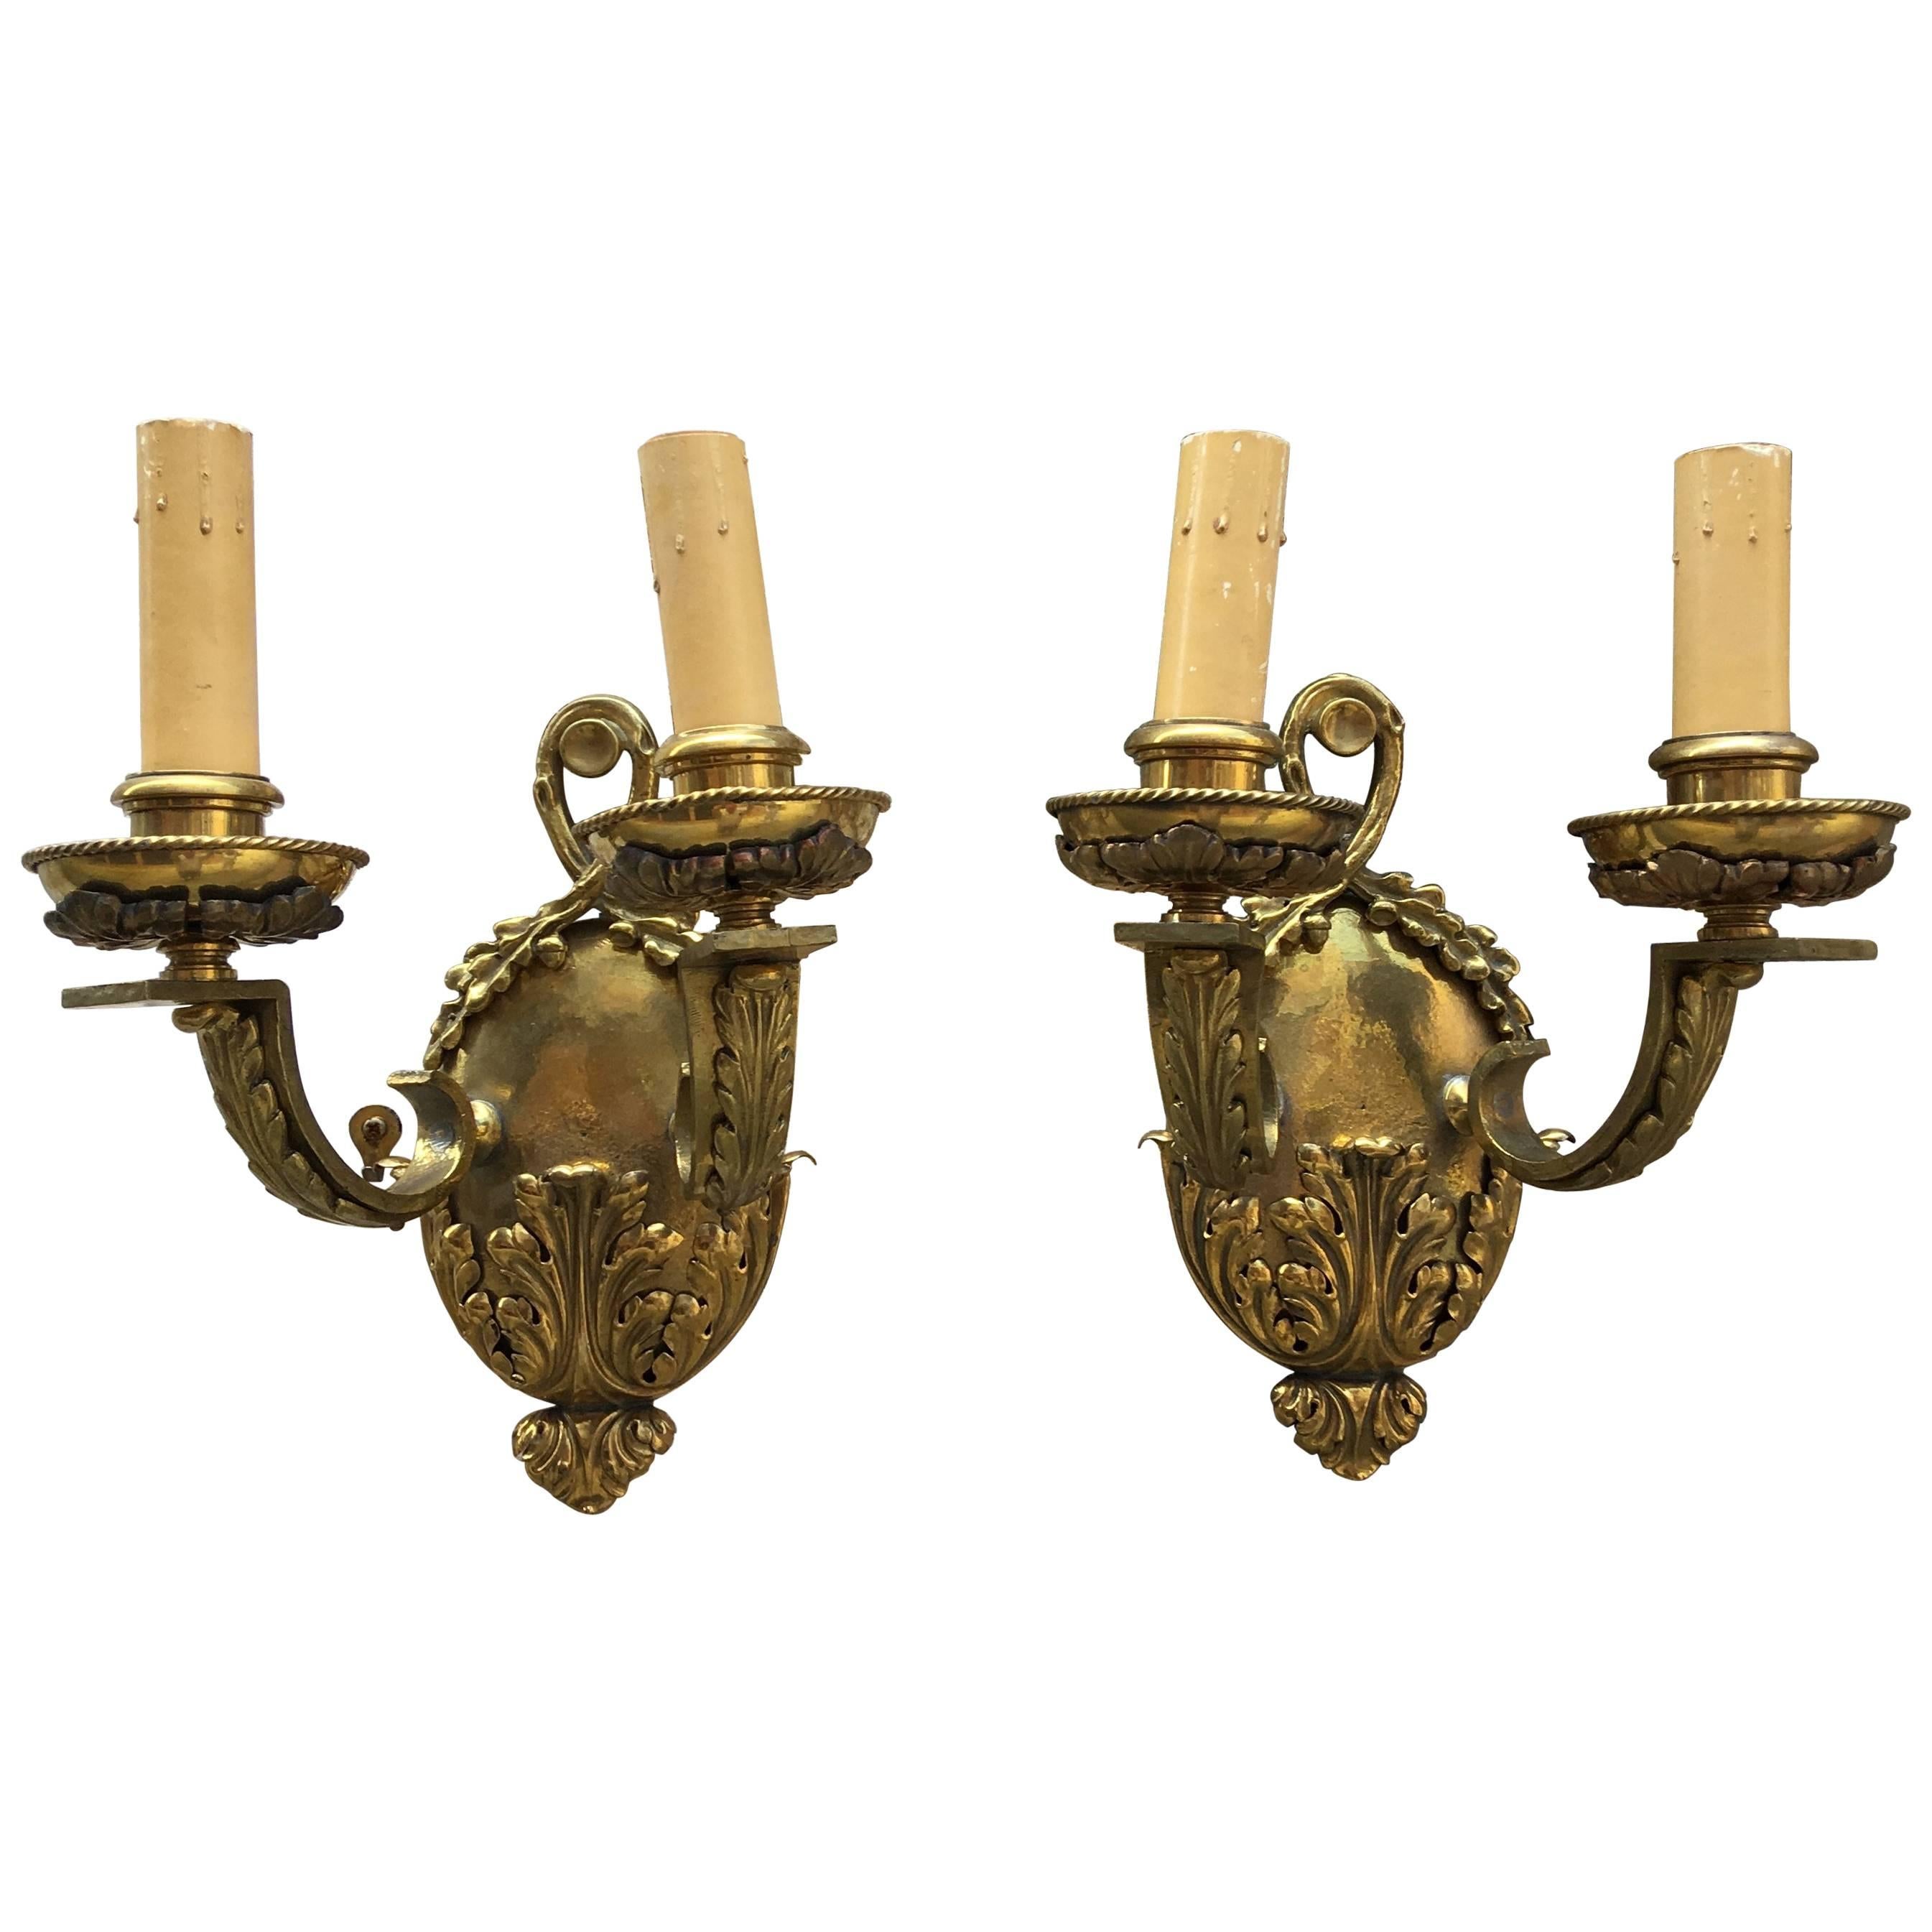 Pair of English Ornate Double Arm Brass Sconces